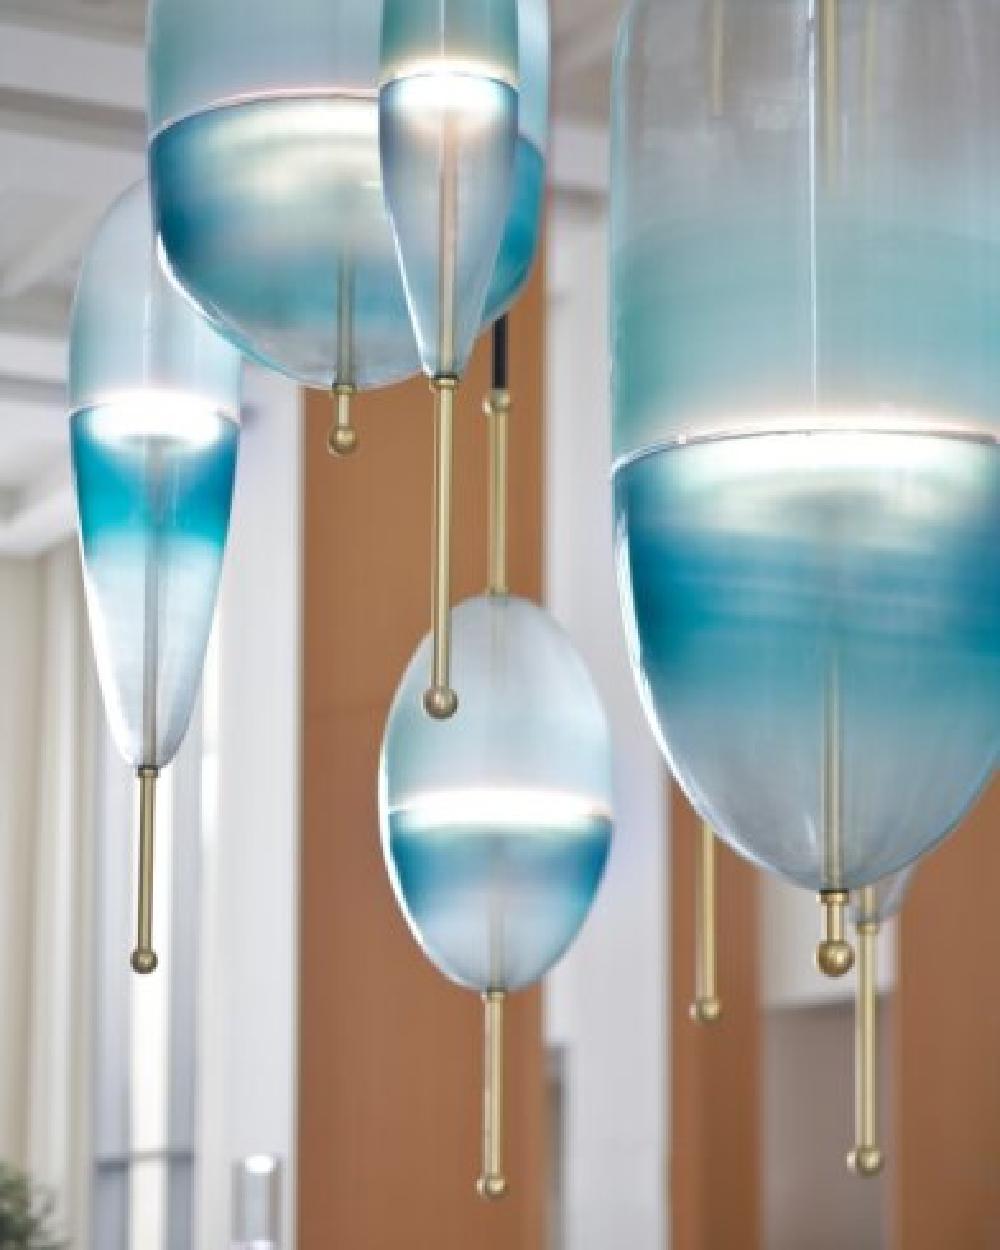 FLOW[T] S6 Pendant lamp in Turquoise by Nao Tamura for Wonderglass For Sale 1